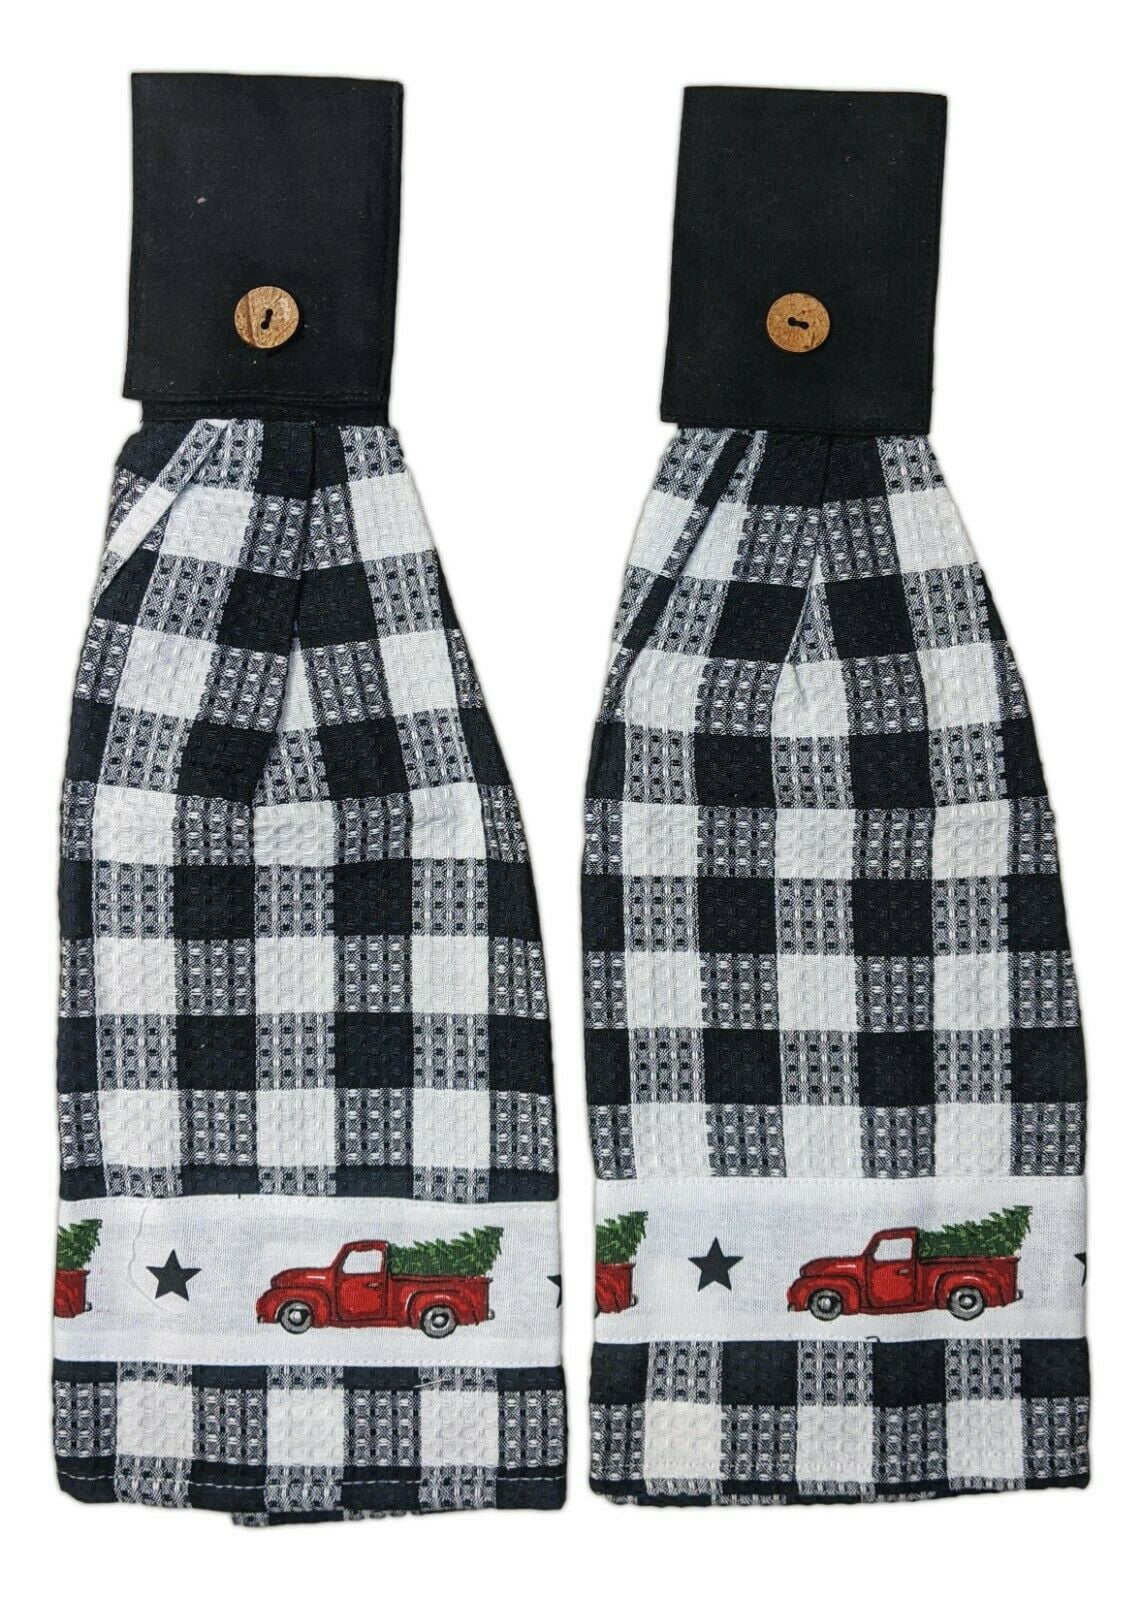 NWT*2 CHRISTMAS HOLIDAY KITCHEN DISH TOWELS WITH RED TRUCK & TREE*COTTON 16X26" 